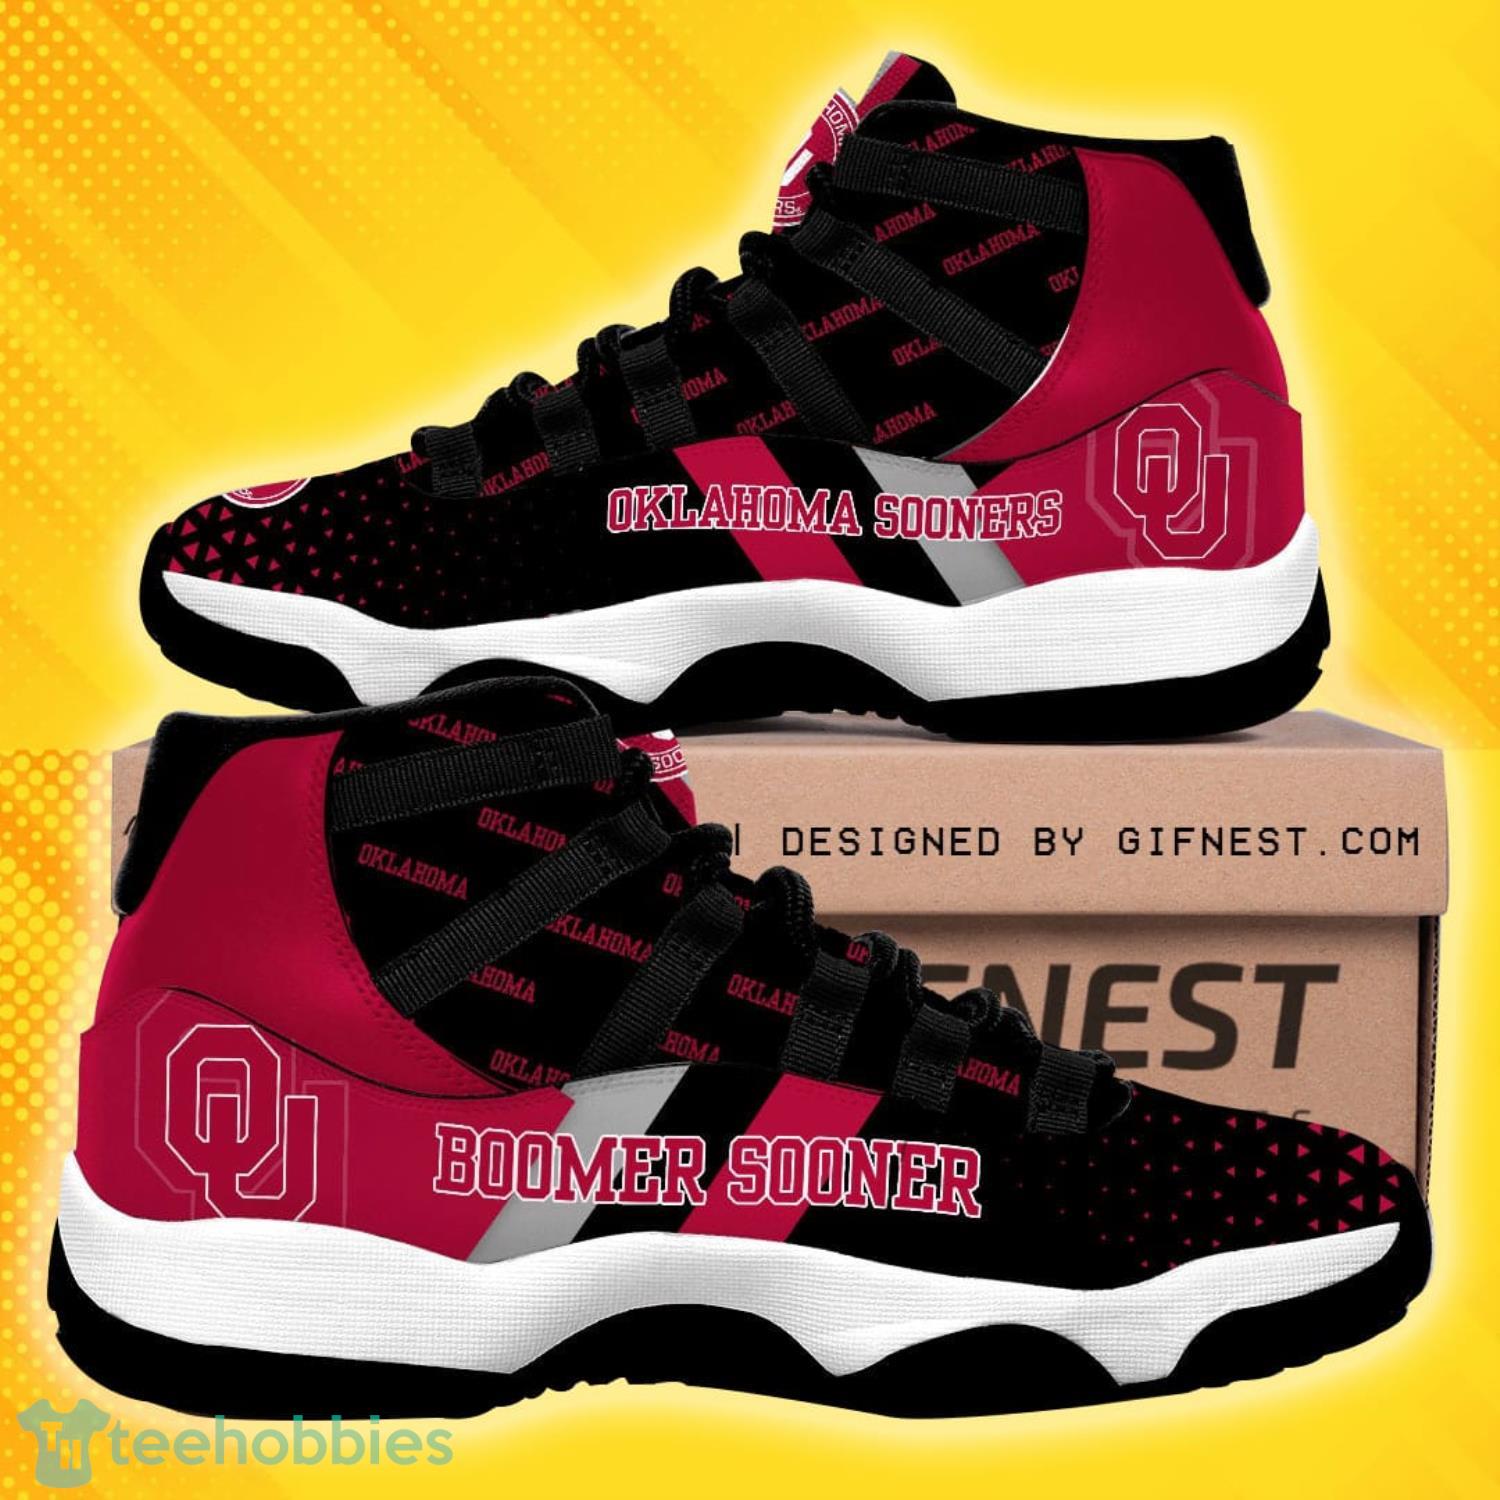 Oklahoma Sooners Team Air Jordan 11 Shoes For Fans Product Photo 1